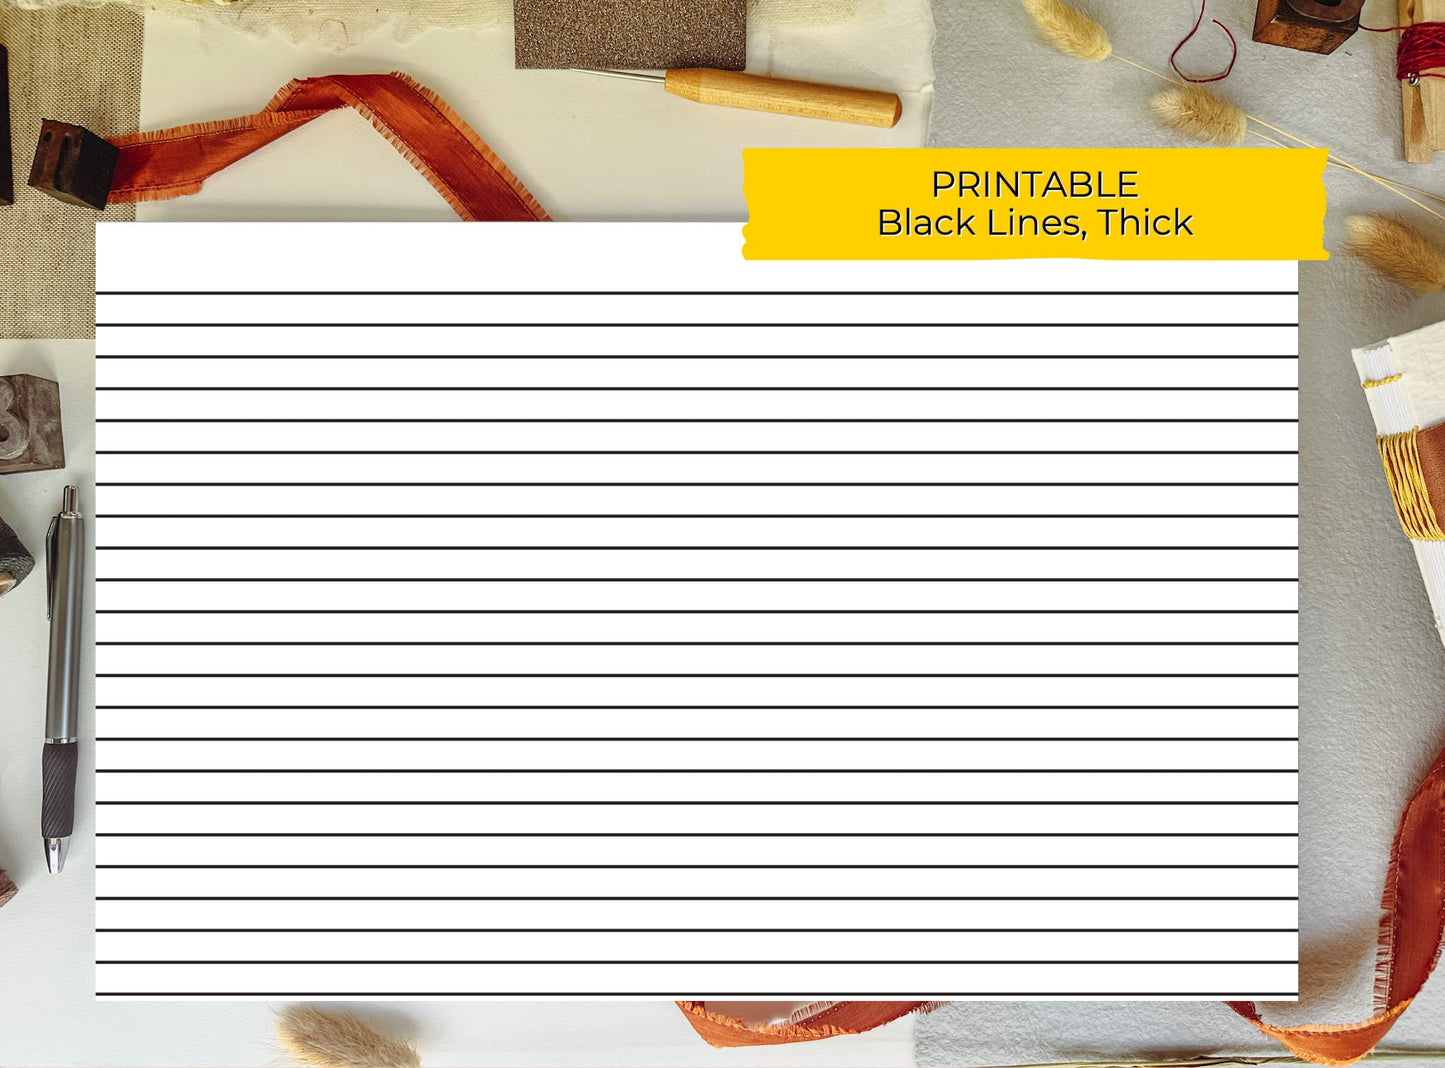 11 x 17 Thick To Edge LINED/RULED PRINTABLE Digital Book Binding Signature File - Black Lines